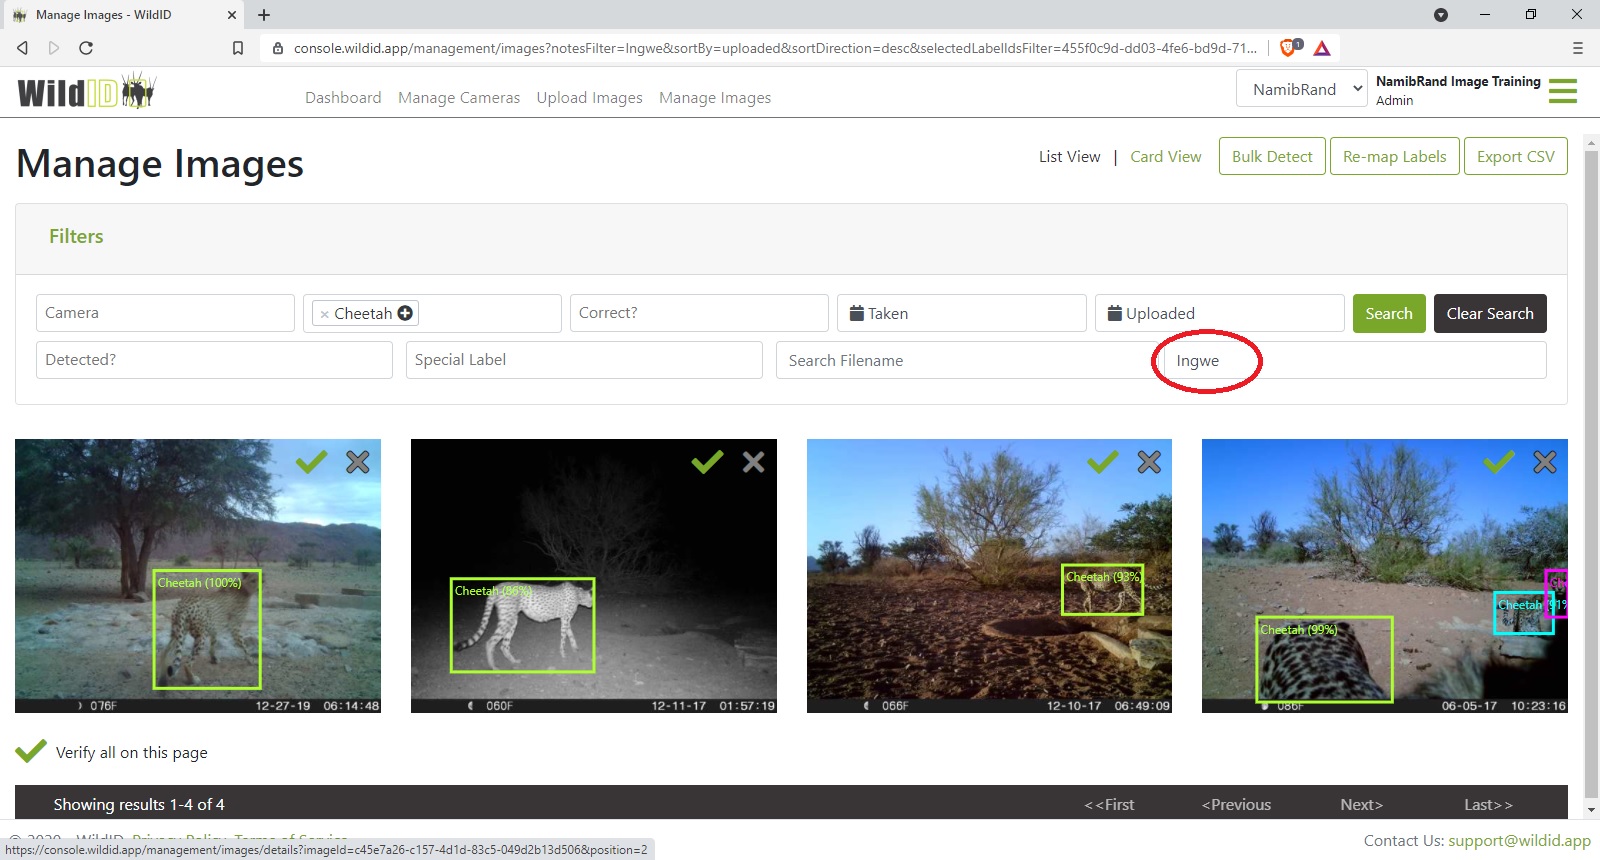 Example WildID screen showing searching all images for those matching specified keywords in the Notes field.